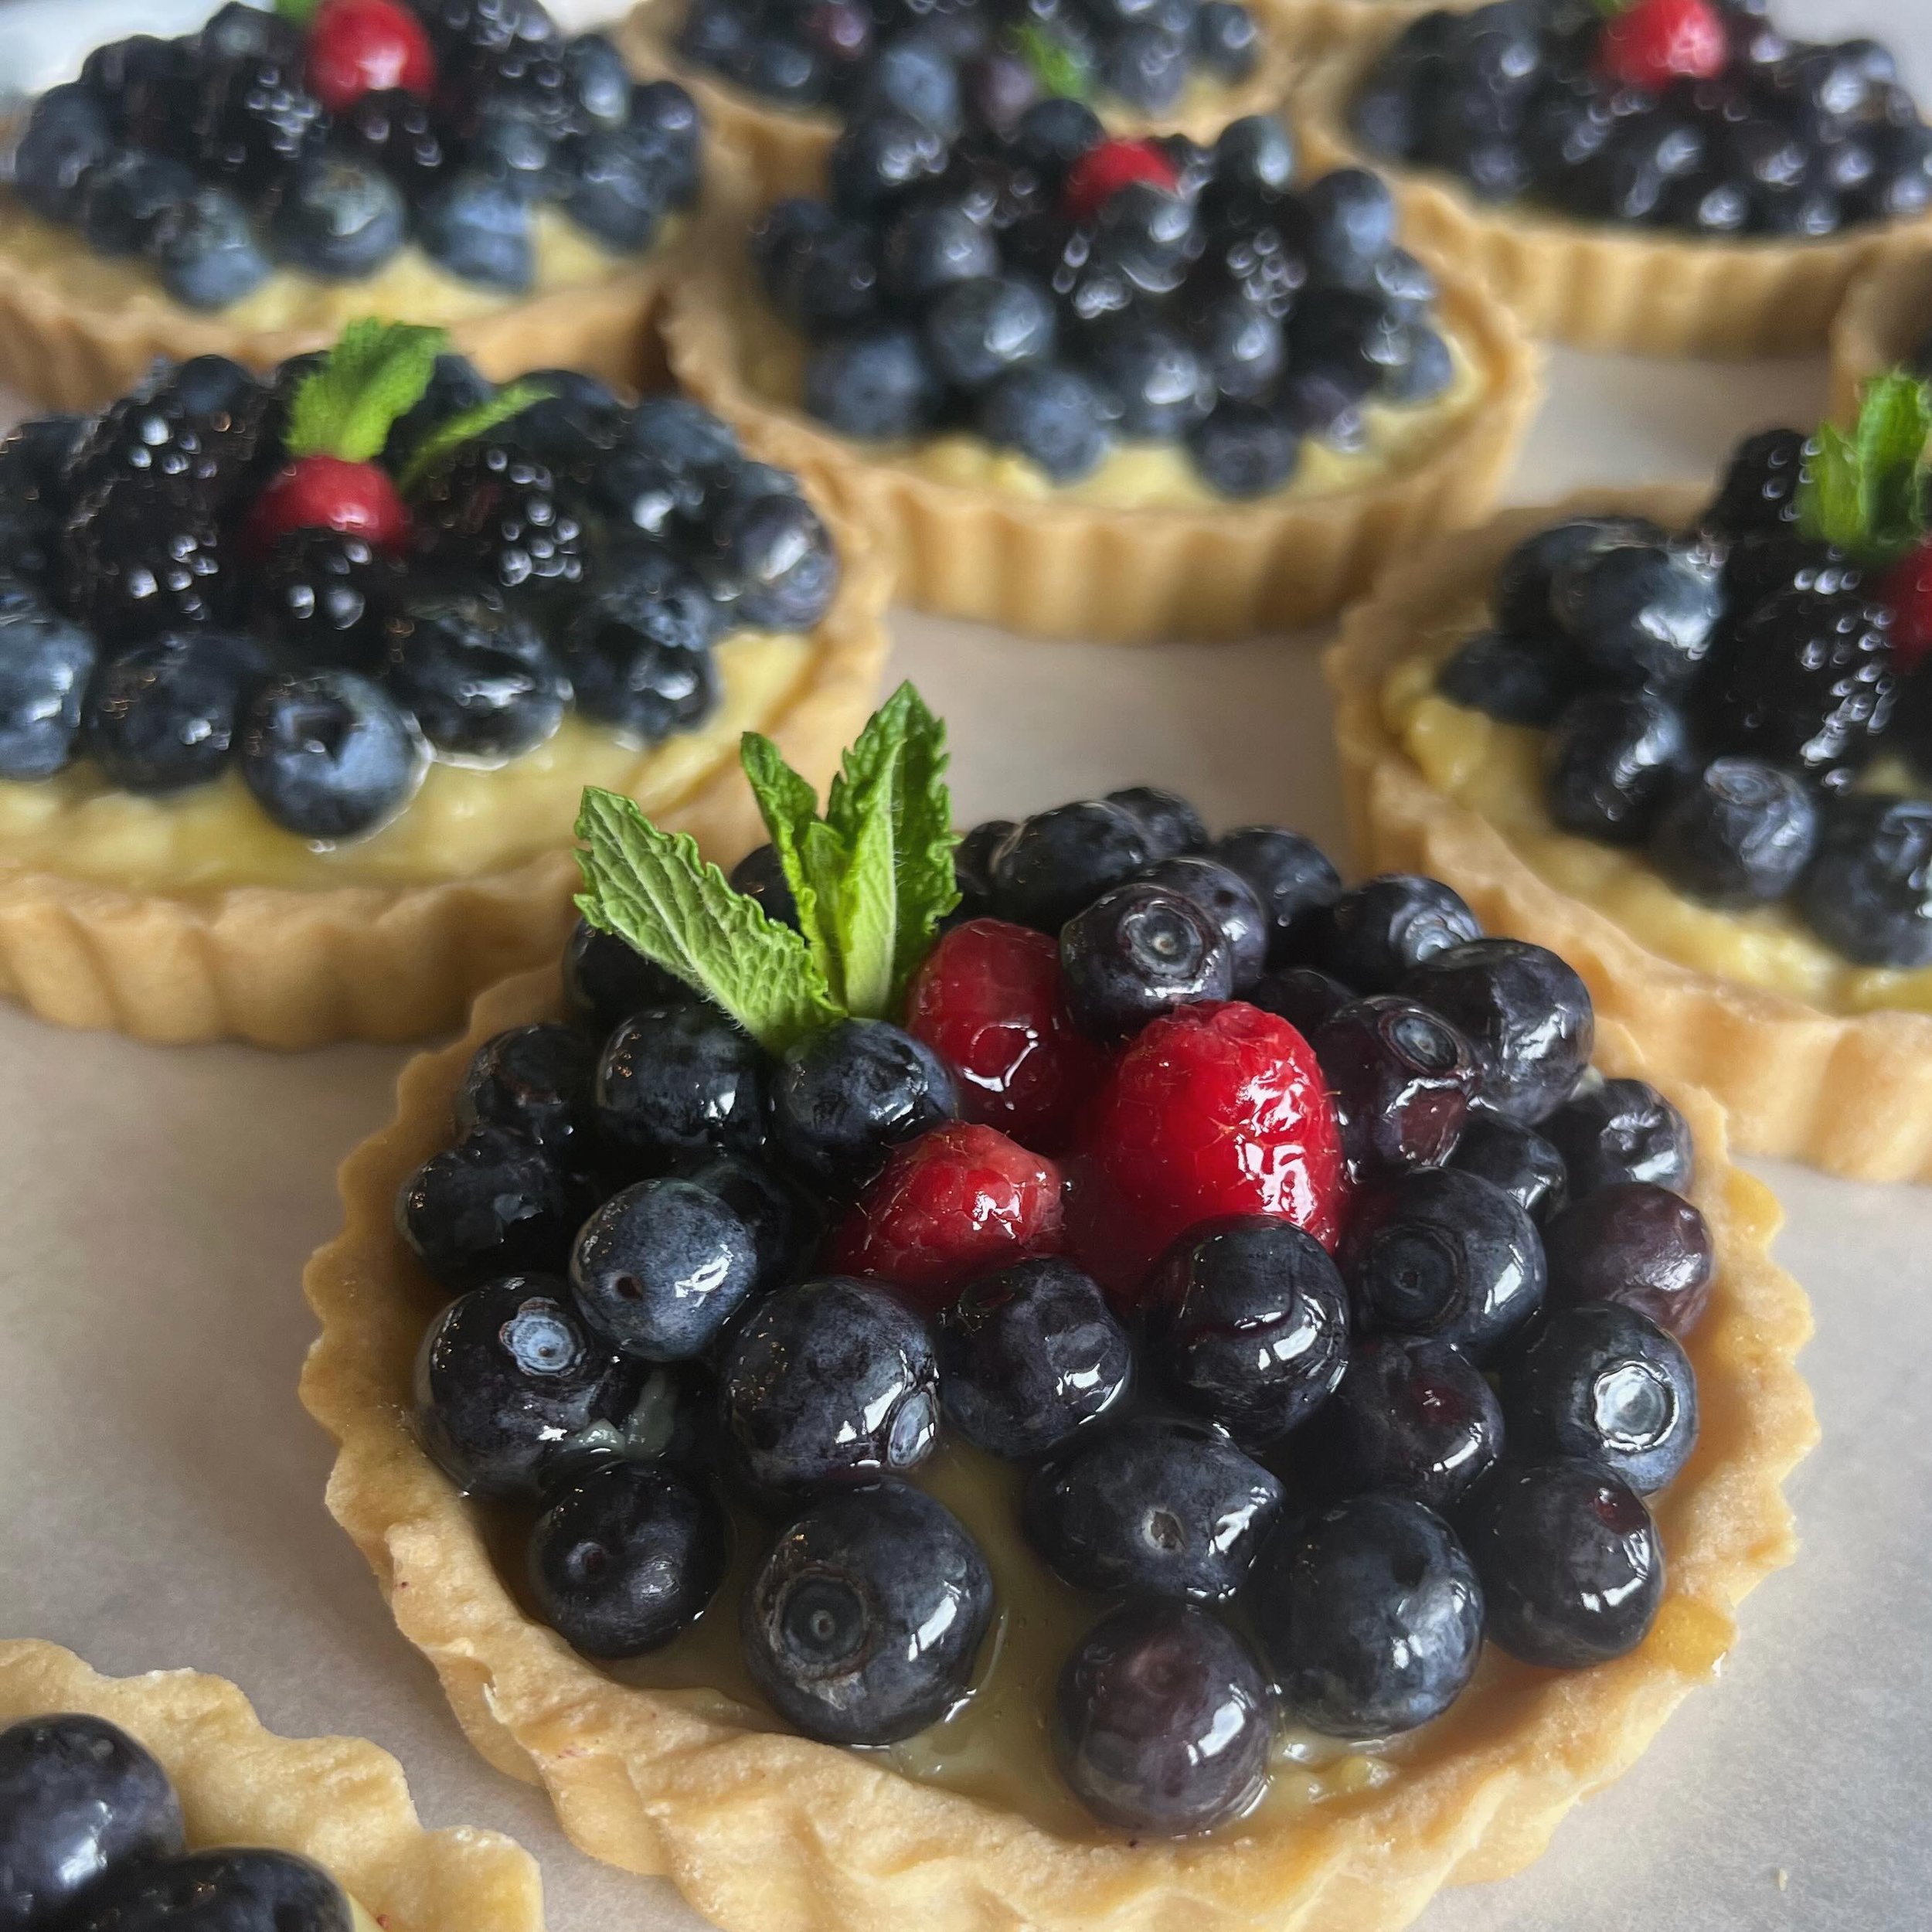 🌸 Queen of Hearts Tart 🌸
.
.
Fresh blueberries and a smooth vanilla pastry cream cradled in a shell of Shugah&rsquo;s buttery shortbread.
.
Mother&rsquo;s Day preorders are now live! Order through our website by May 5 for pick up Saturday May 11th 